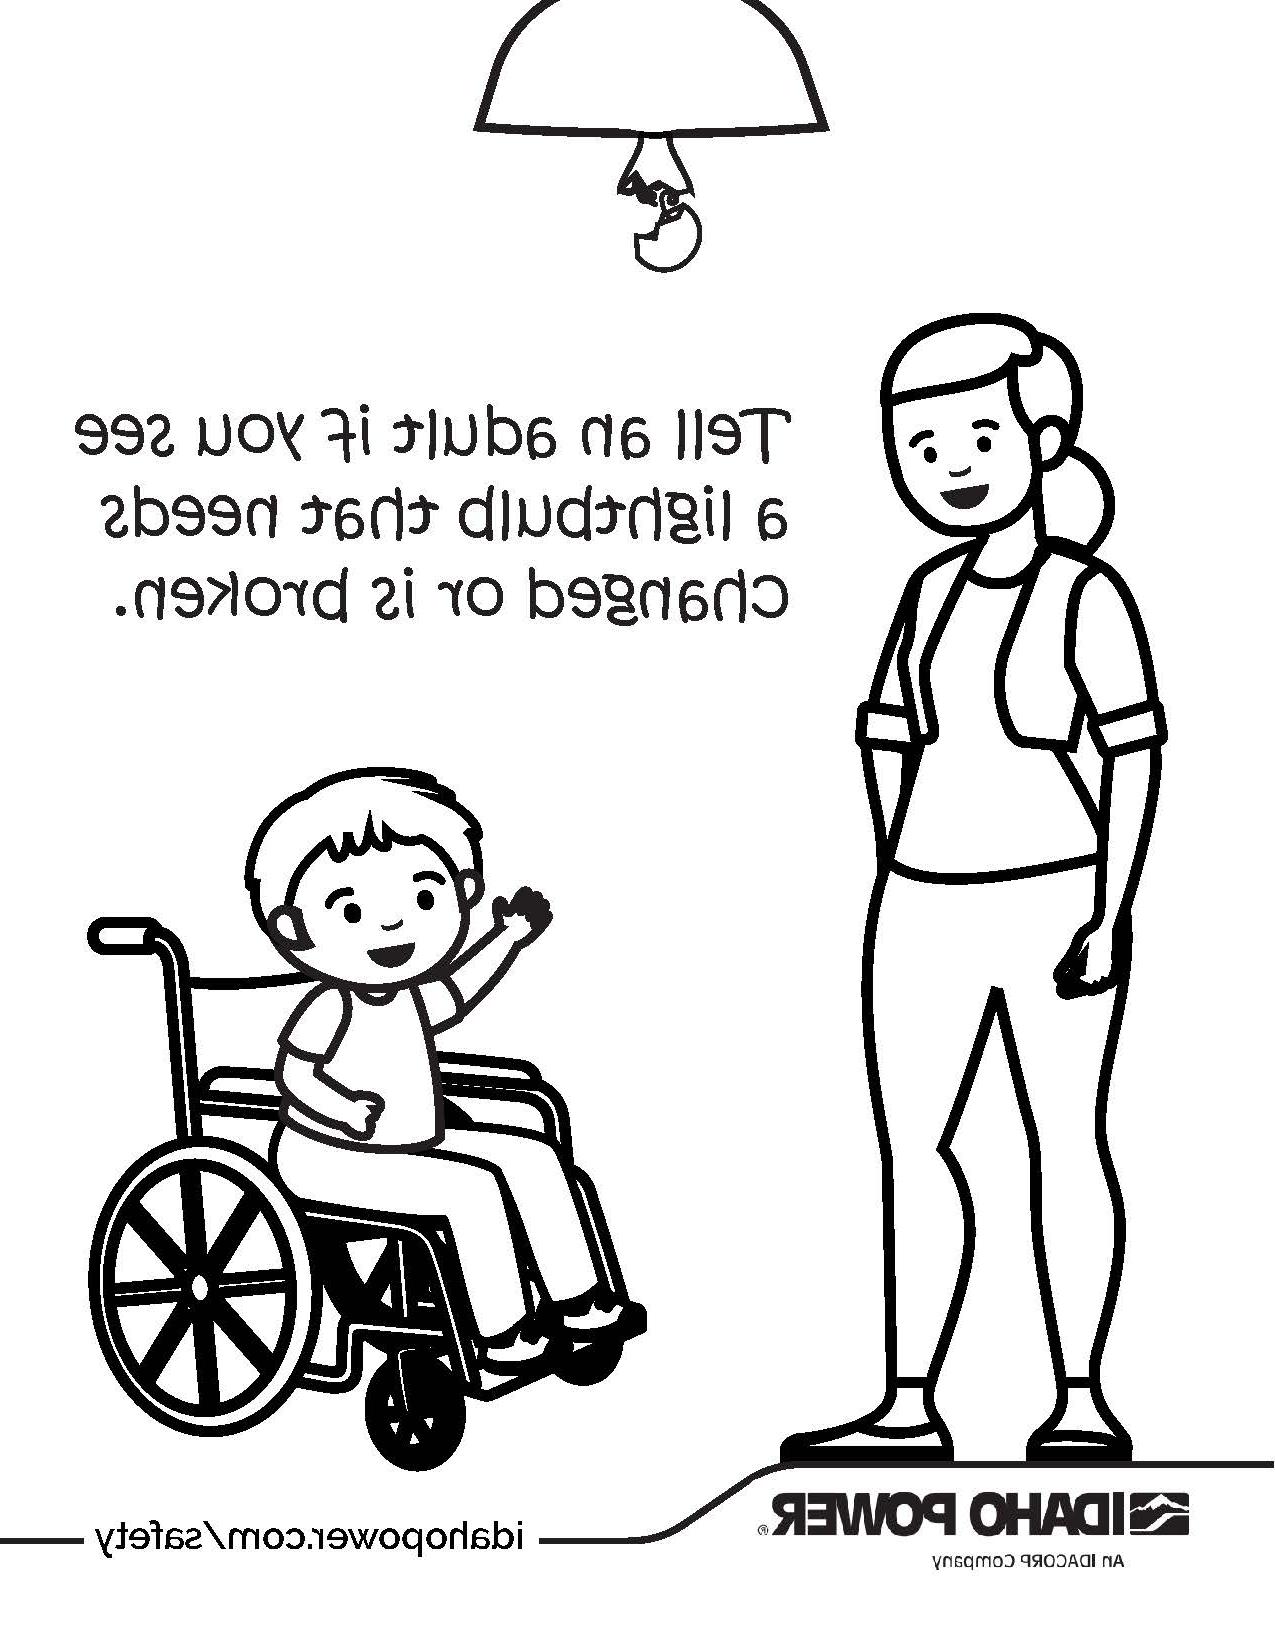 Coloring page of a boy and woman that says, Tell an adult if you see a lightbulb that needs changed or is broken